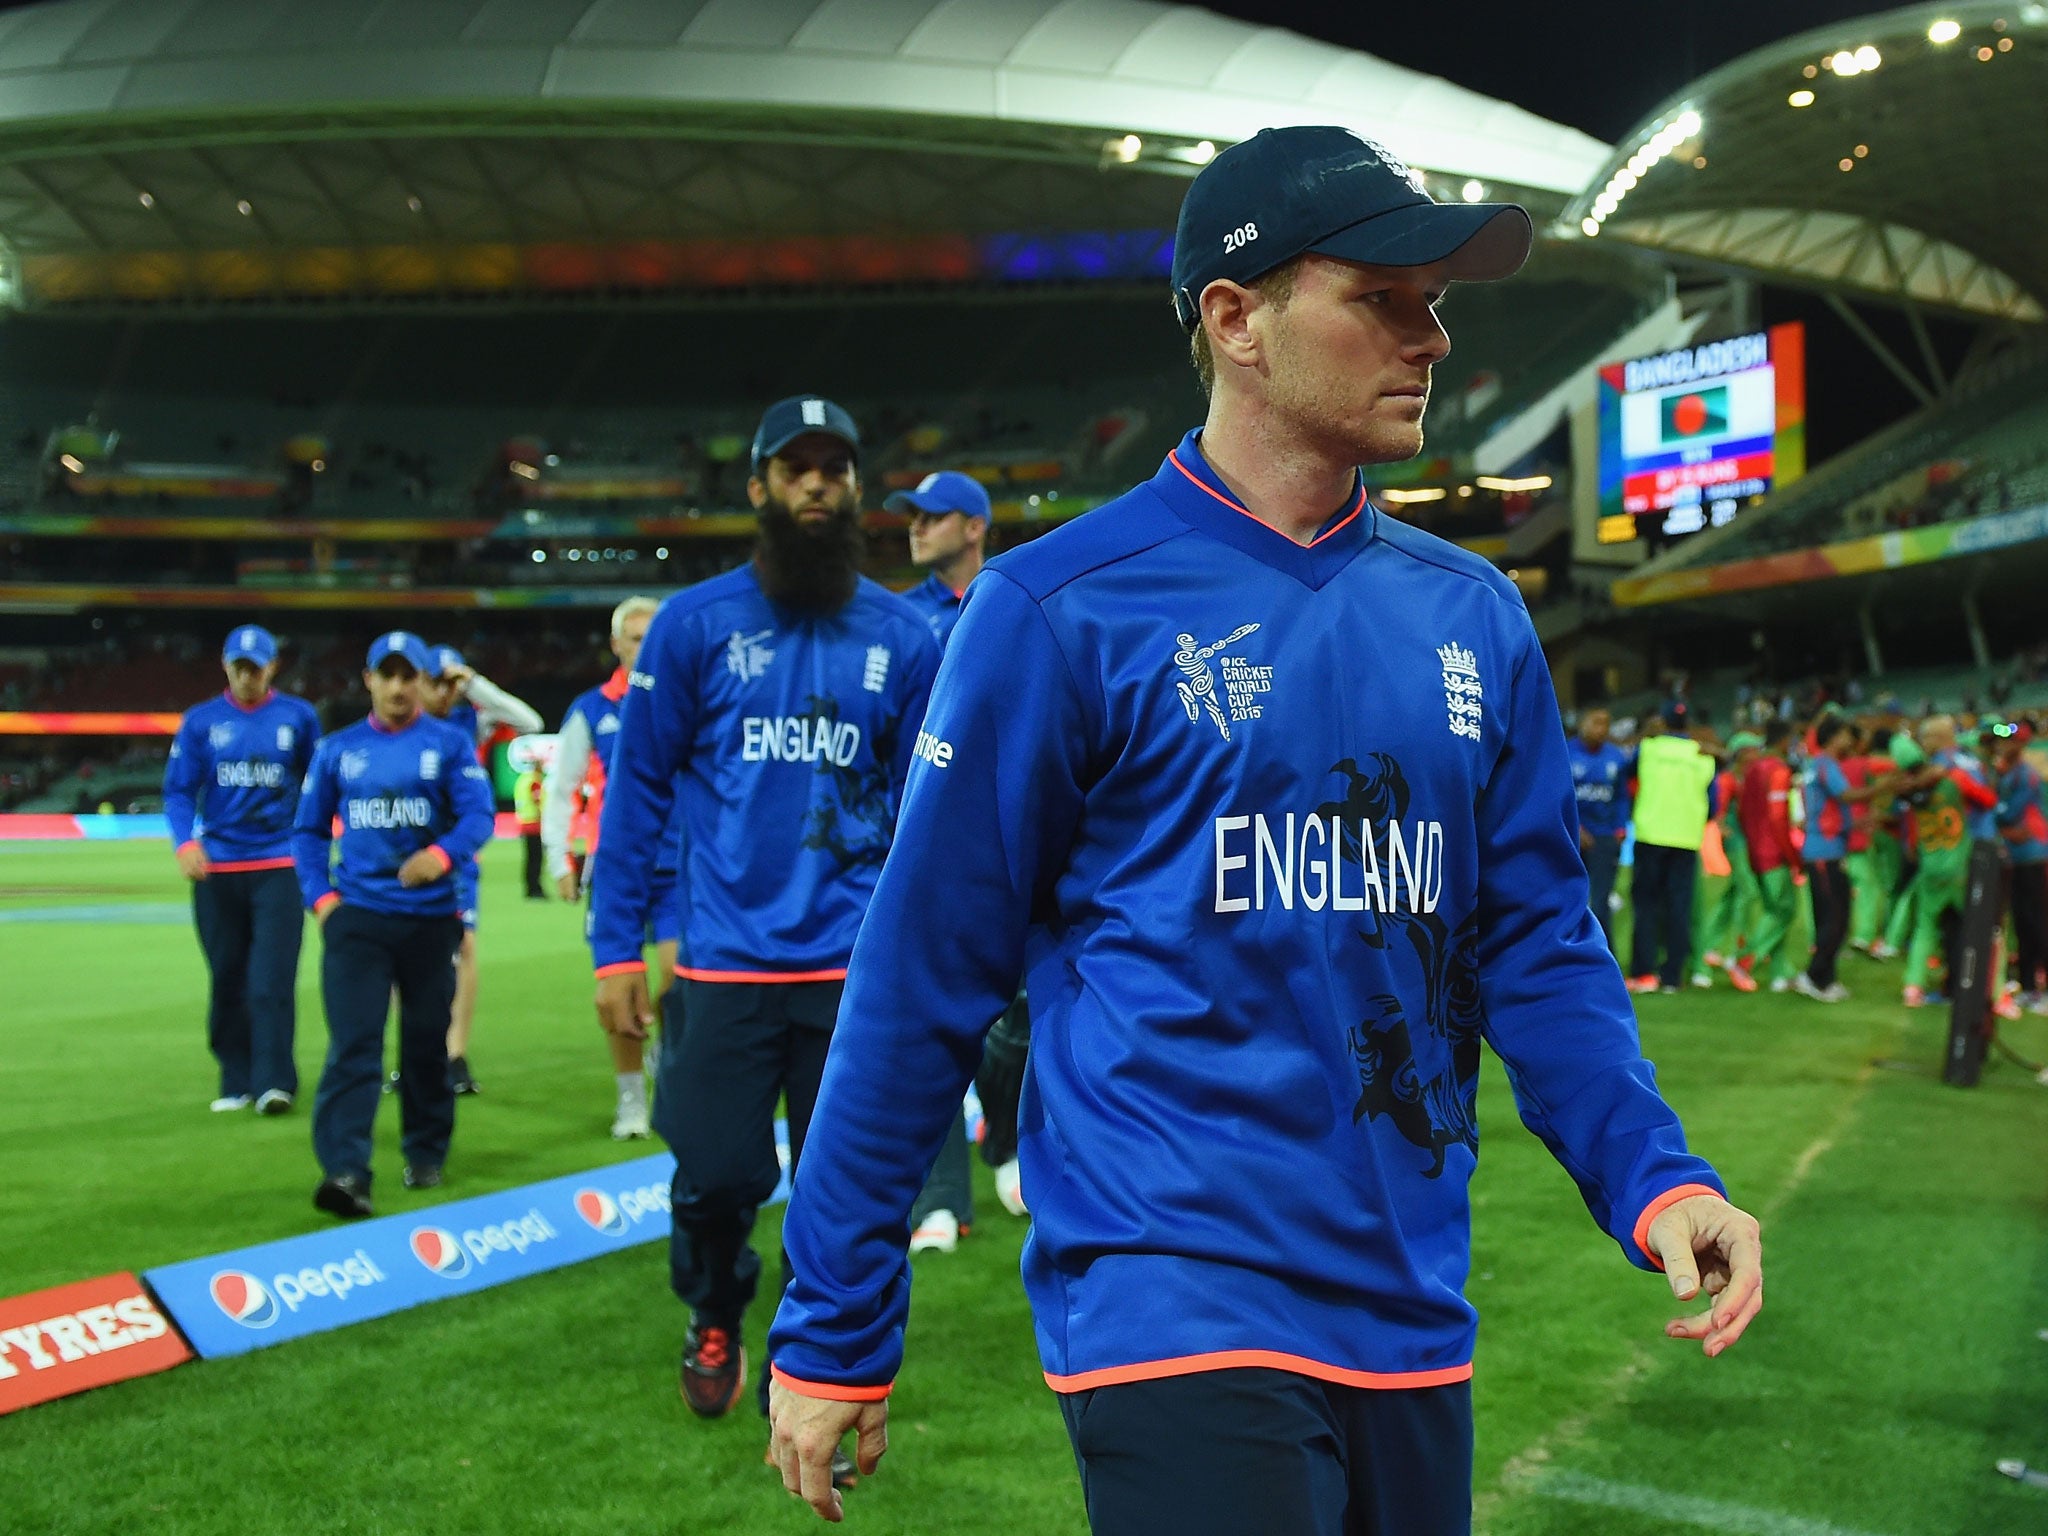 Eoin Morgan's side must bounce back from their abject failure in the World Cup by looking to new horizons